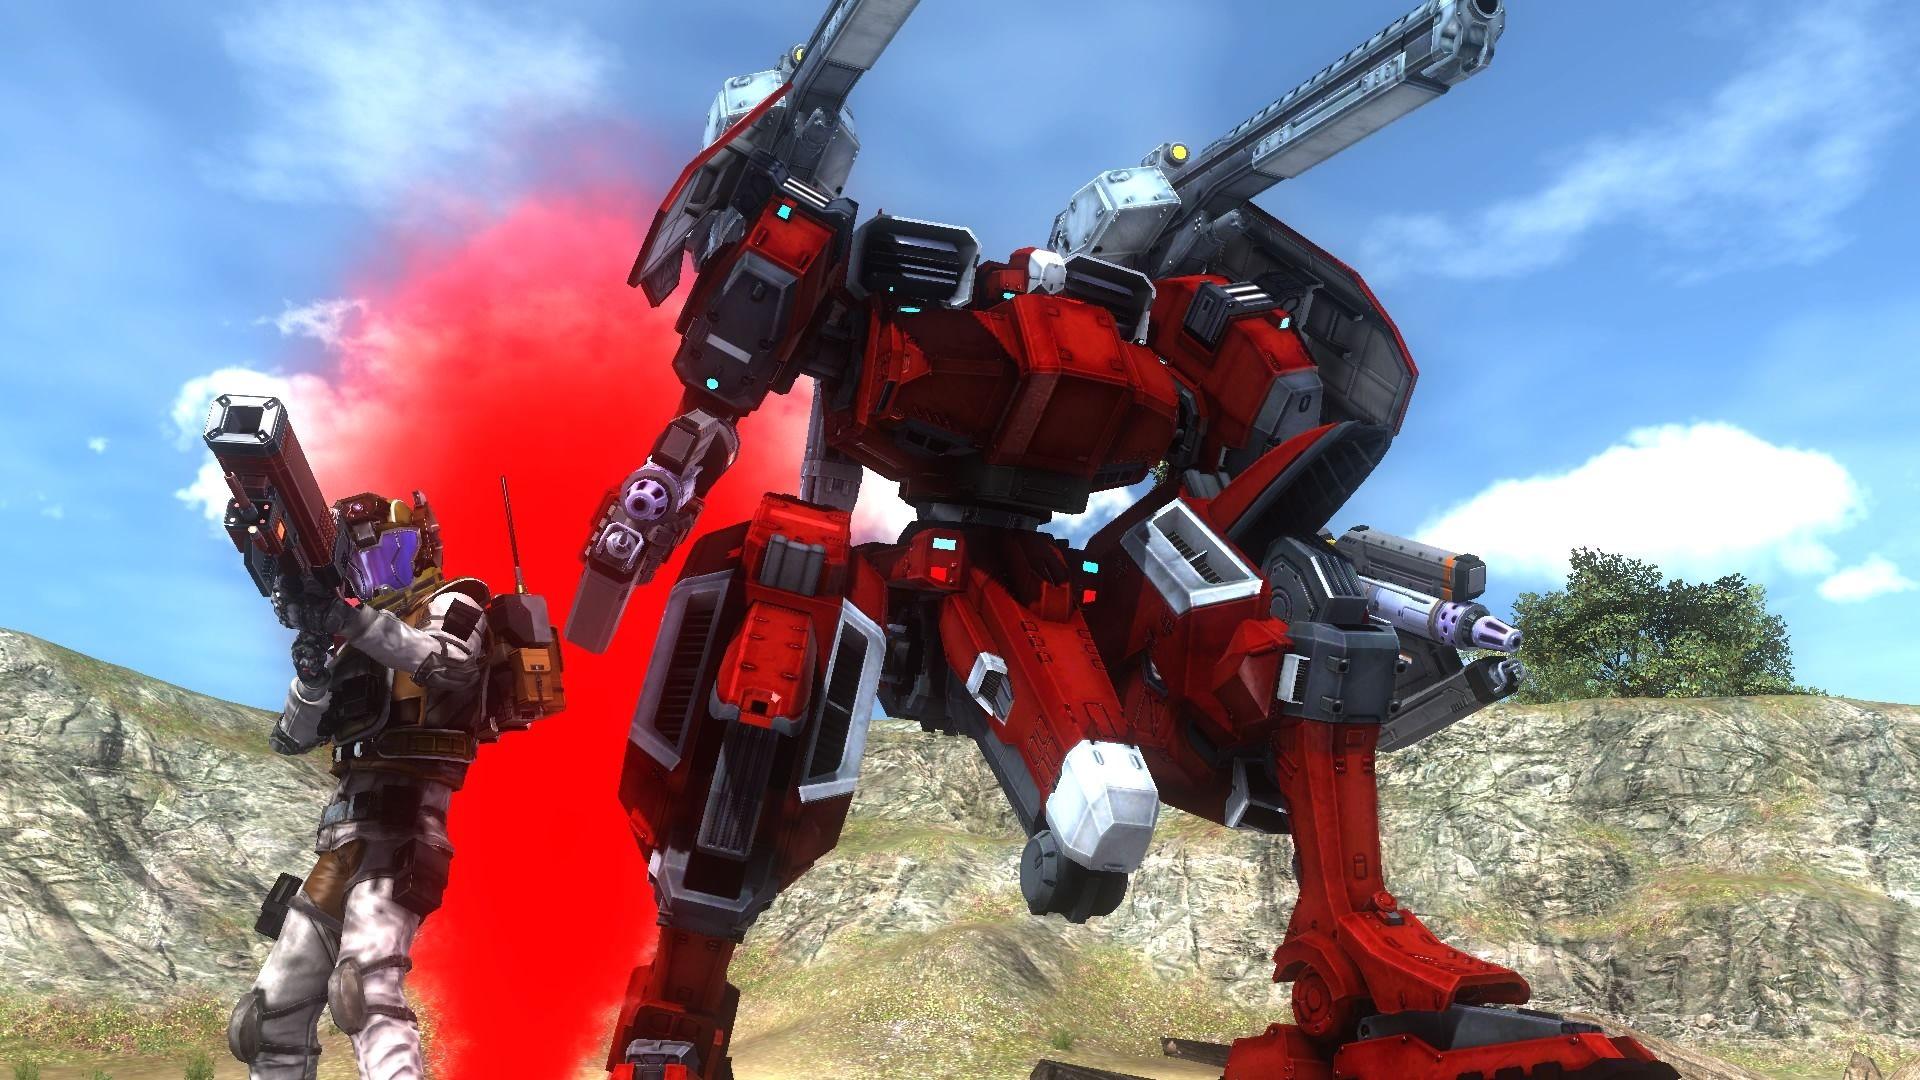 PS4 Exclusive Earth Defense Force 5 Gets New in English